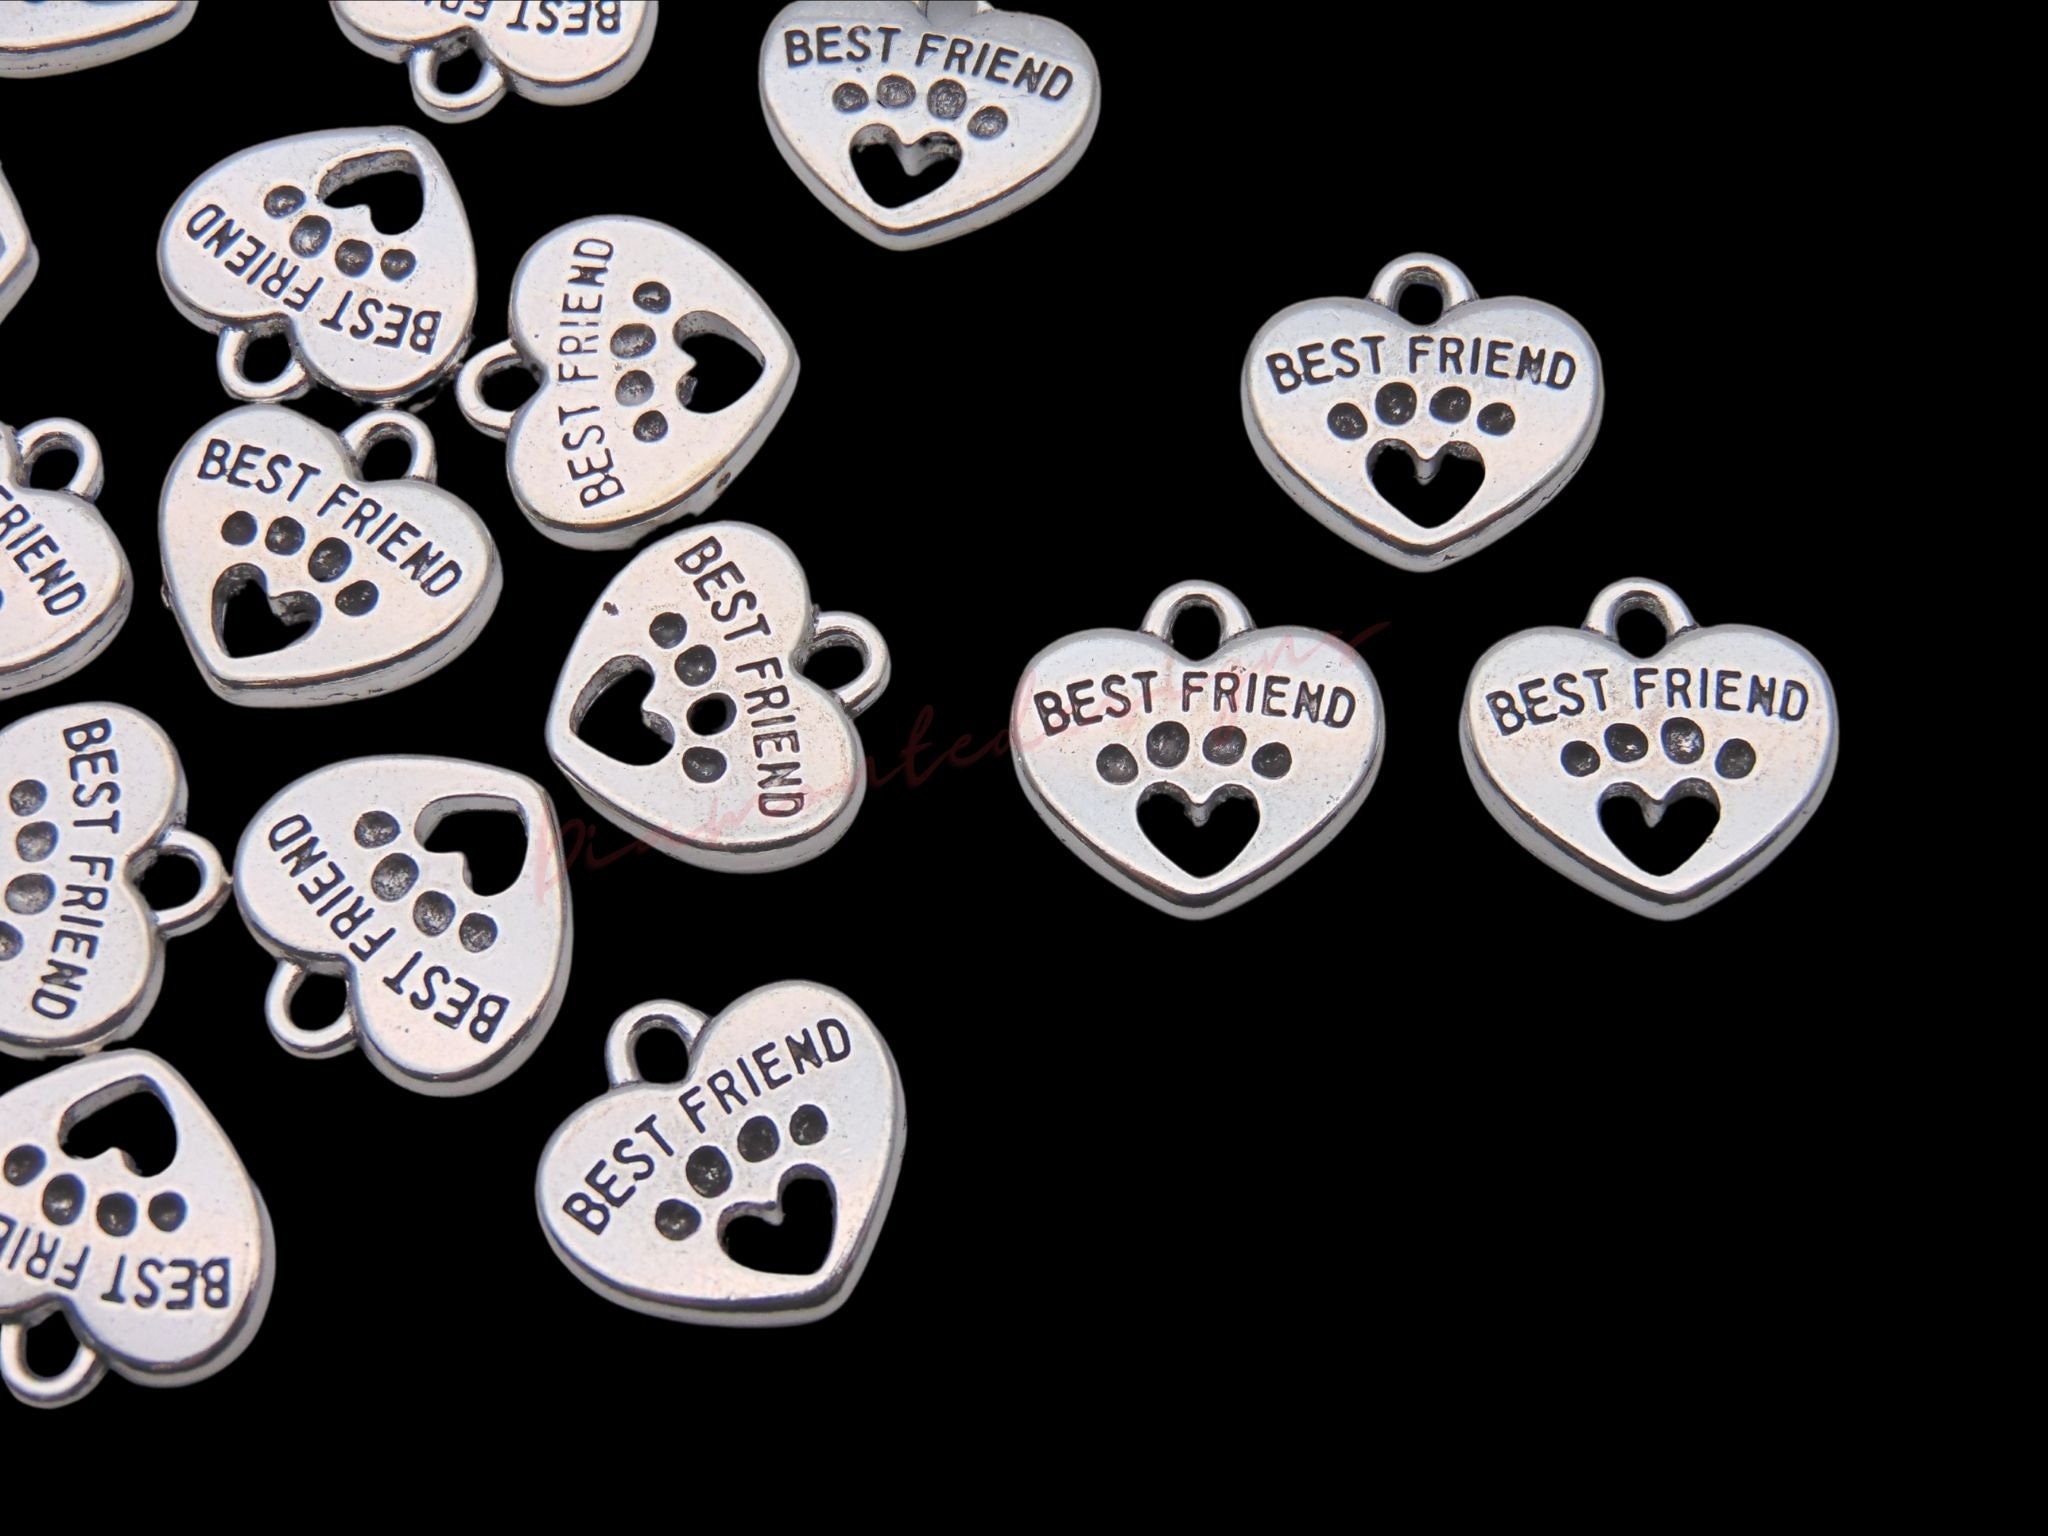 Everbling Dog Puppy Paw Print Pet 925 Sterling Silver Bead Fits European Charm Bracelet 